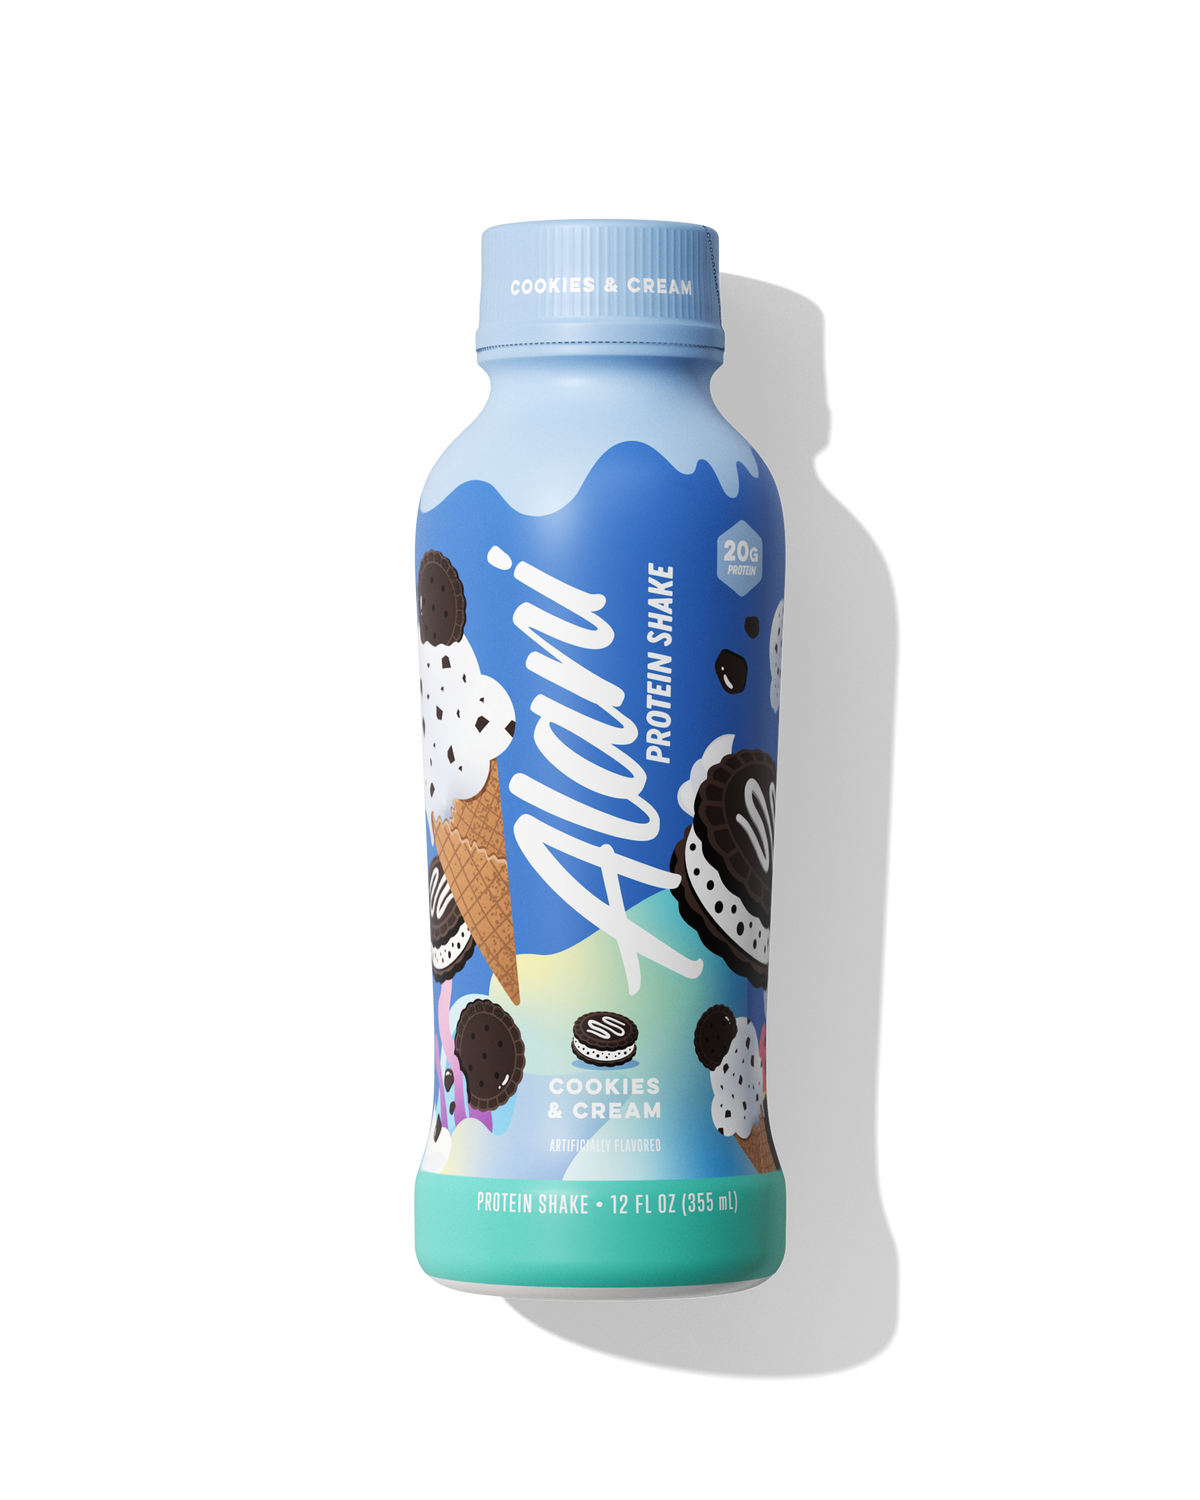 Super Milk (High Protein, High Calorie Beverage) with Flavoring